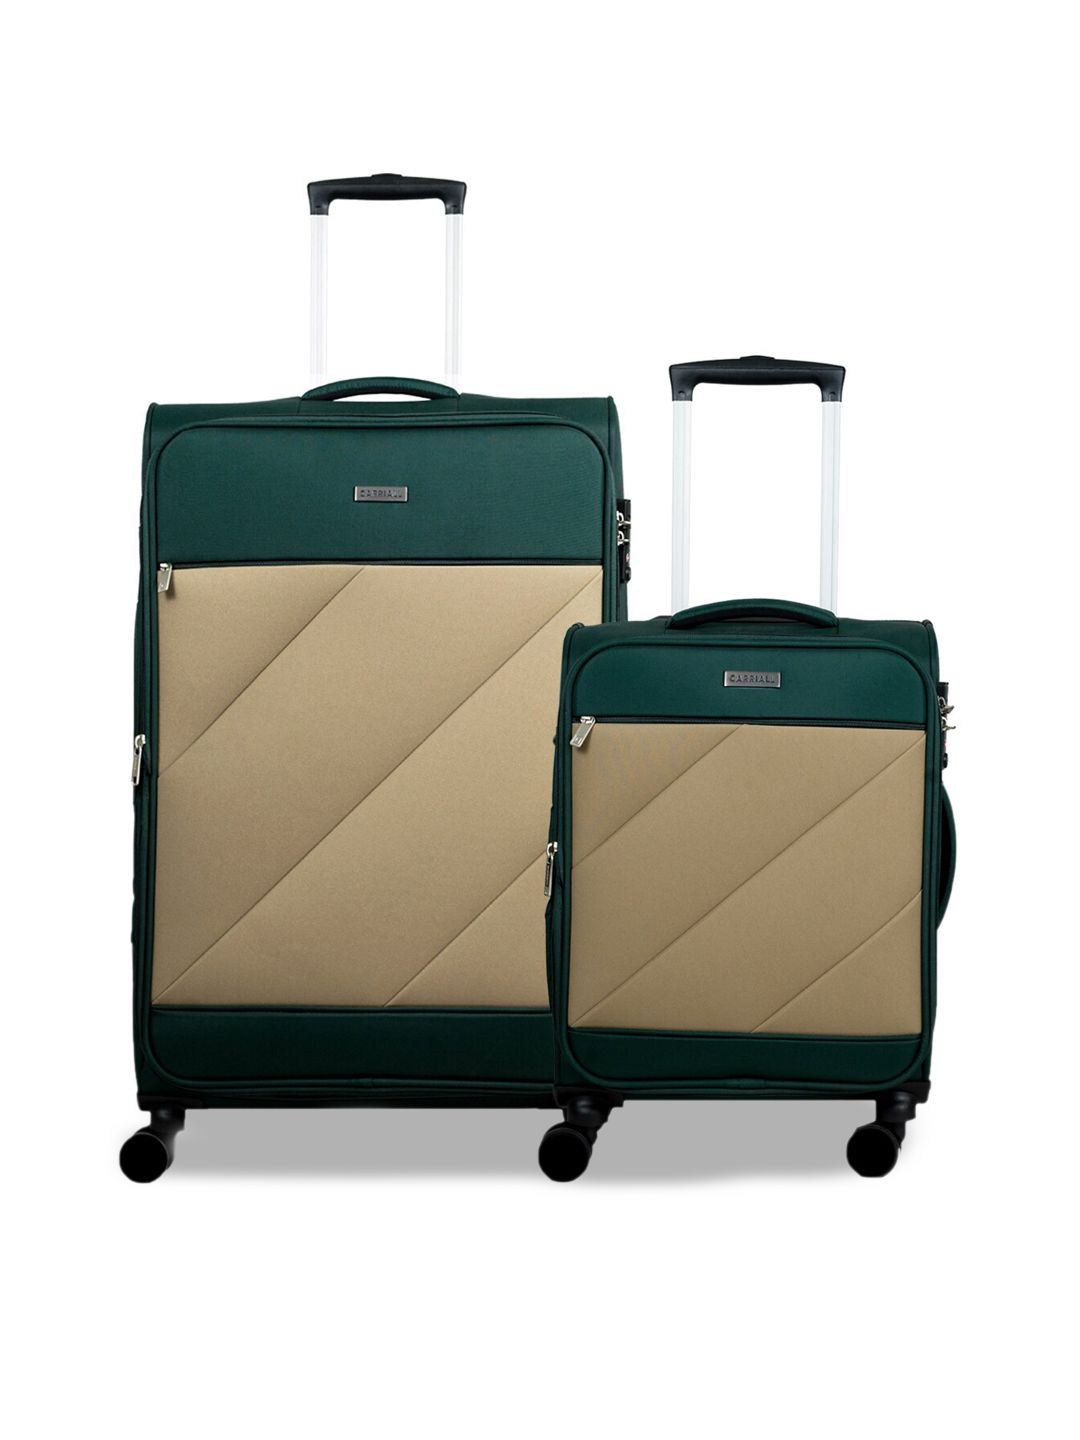 CARRIALL Set Of 2 Green Solid Soft-Sided Trolley Suitcases Price in India